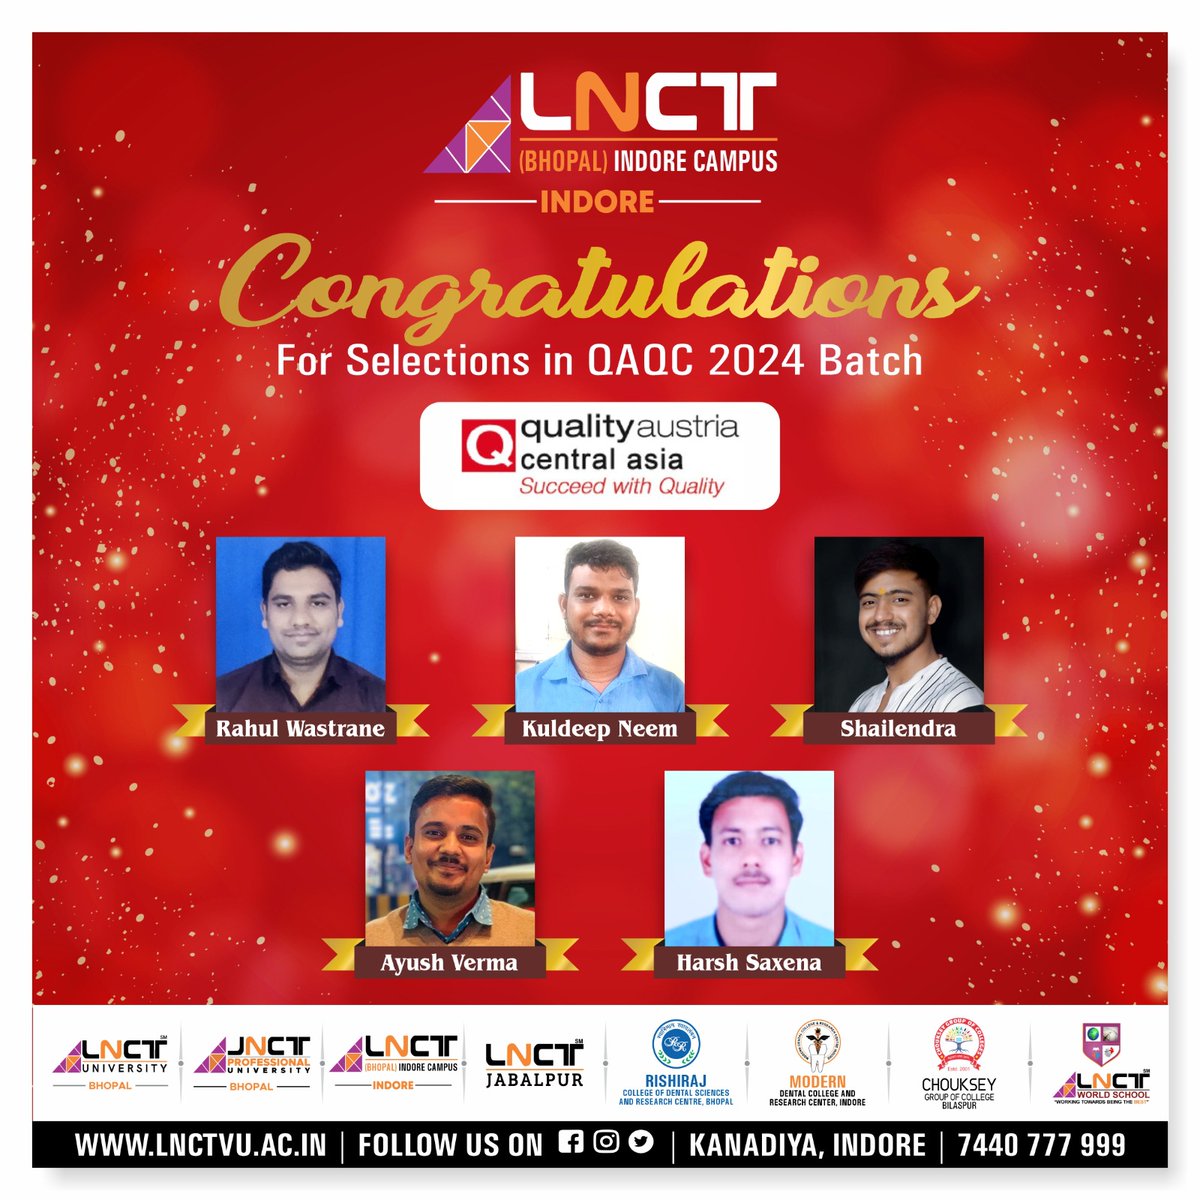 Congratulations to Mr. Rahul Wastrane, Mr. Kuldeep Neem, Mr. Shailendra, Mr. Ayush Verma, and Mr. Harsh Saxena for their selection in the QAQC 2024 Batch! 🌟🎉 Wishing you all success as you embark on this exciting journey with Quality Austria Central Asia. Succeed with Quality!